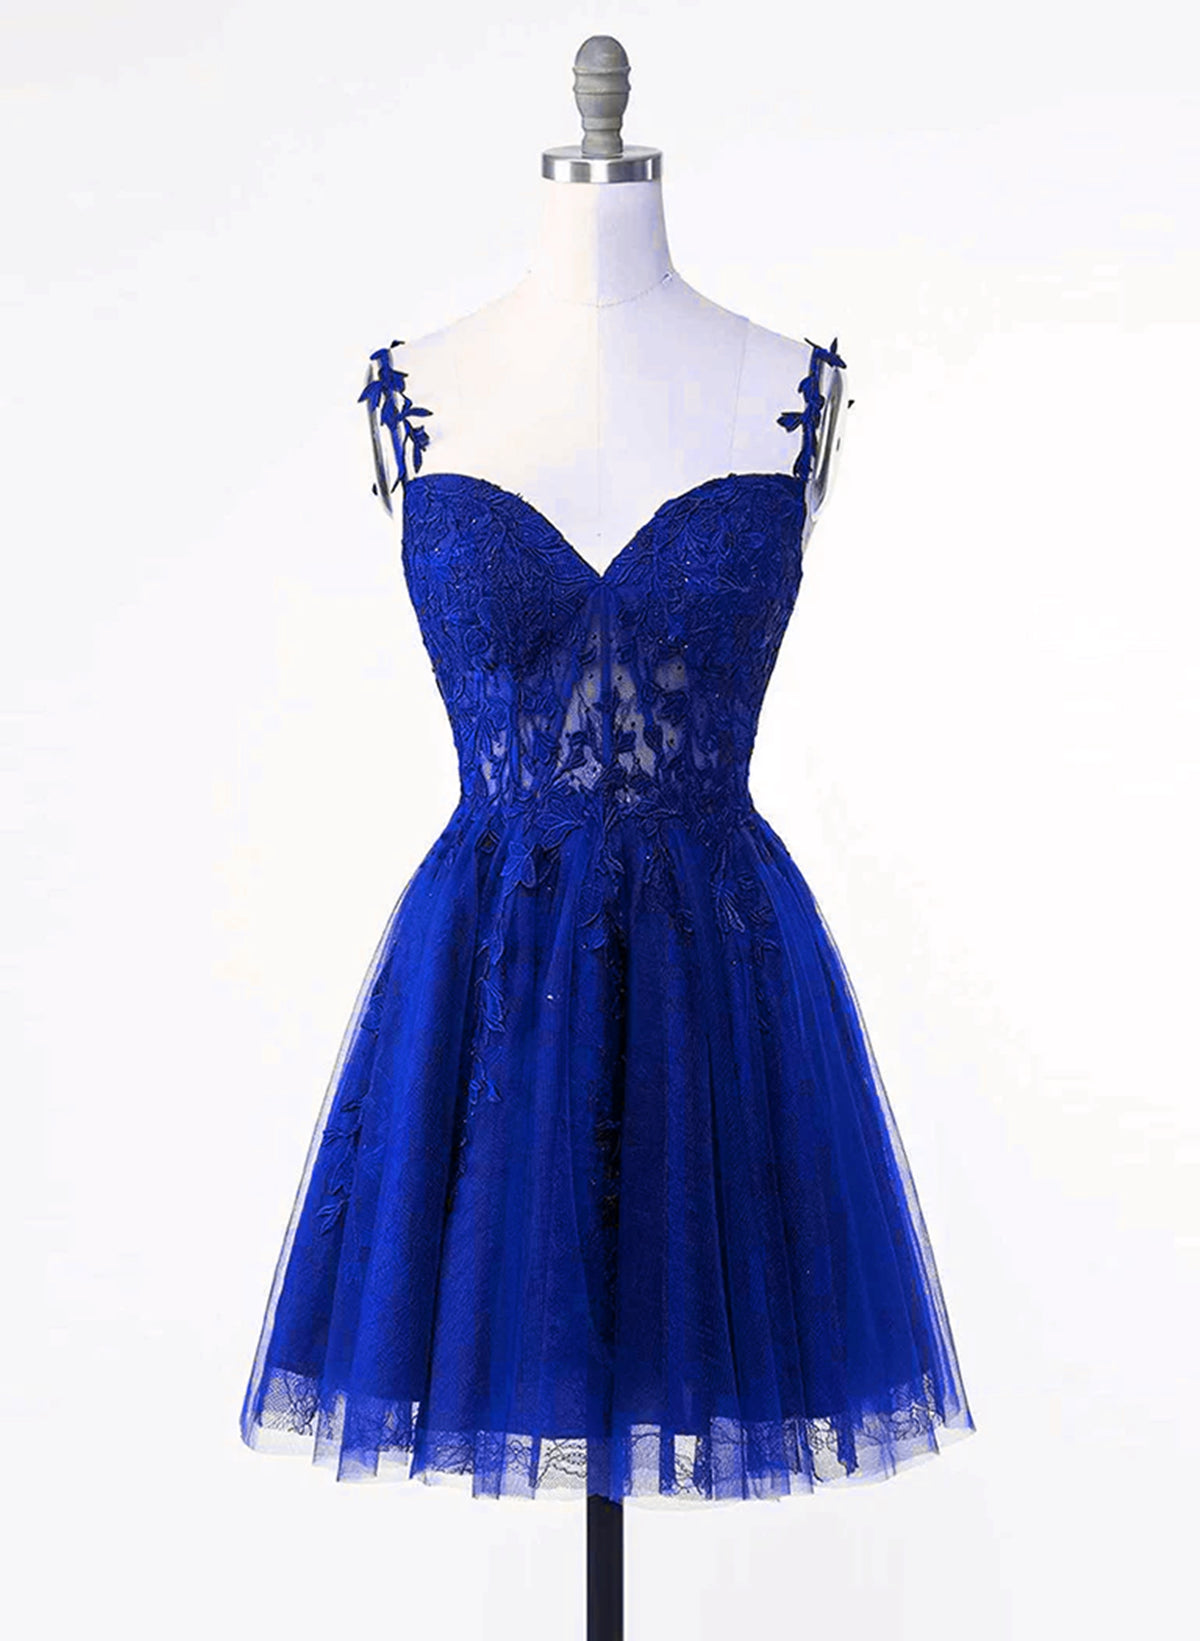 Royal Blue Tulle with Lace Applique Short Formal Dress Outfits For Girls, Royal Blue Homecoming Dress